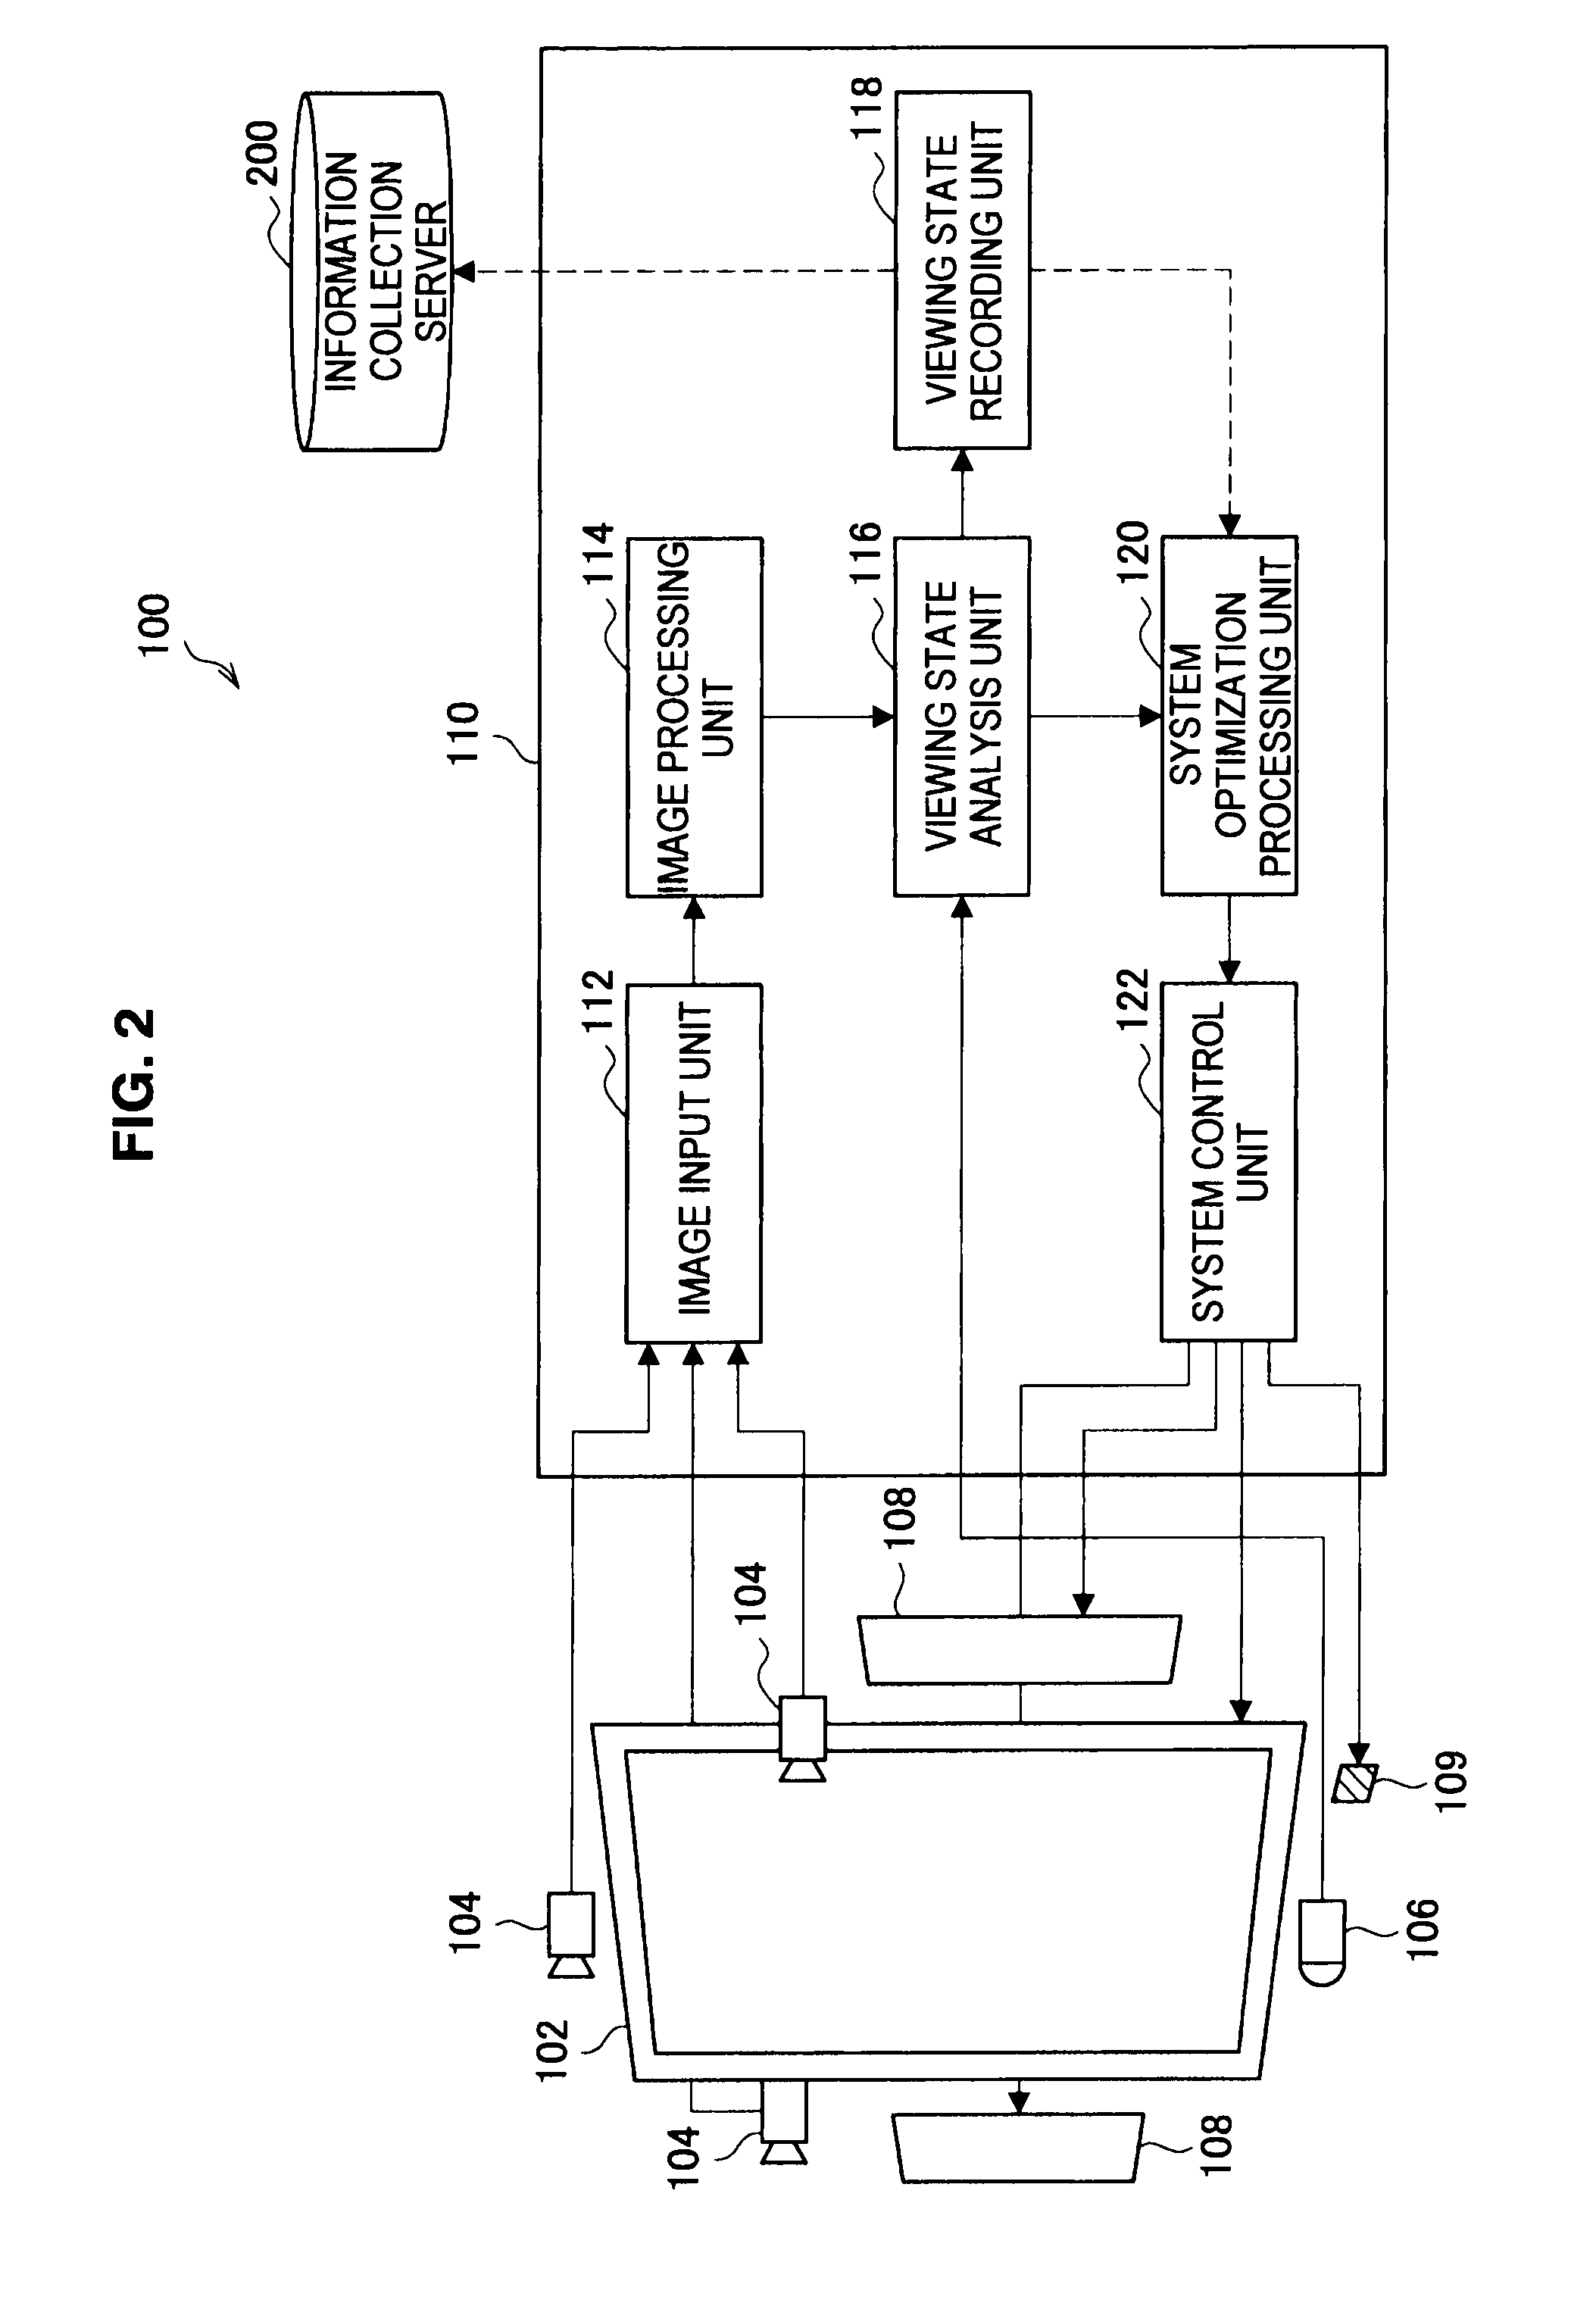 Display device and control method